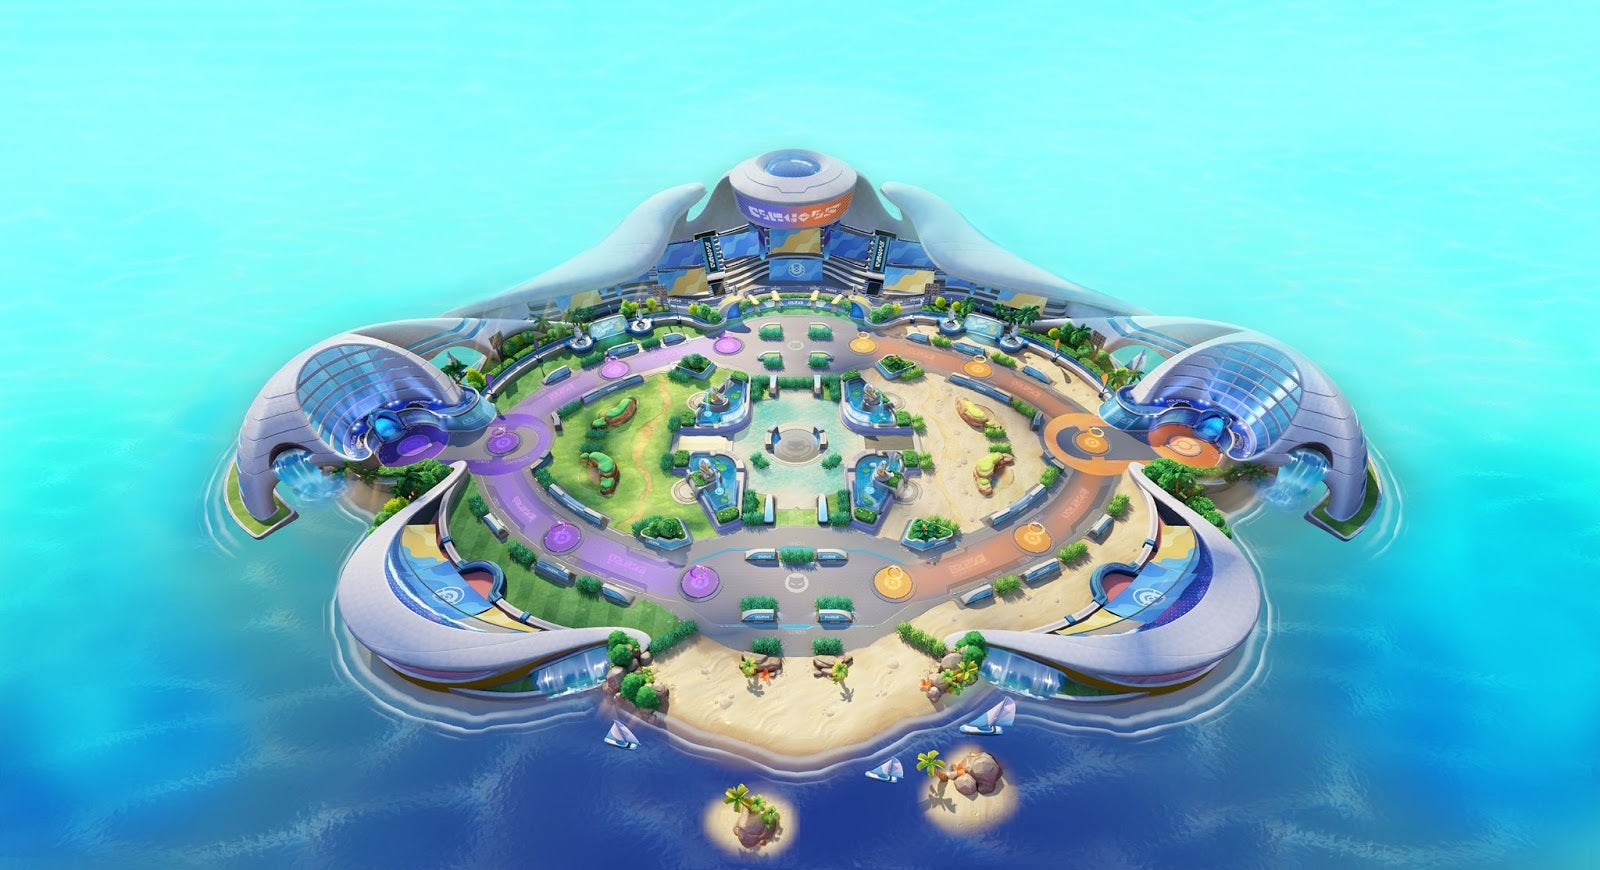 Pokémon battle arenas sure have changed over the years.  (Image: The Pokémon Company)